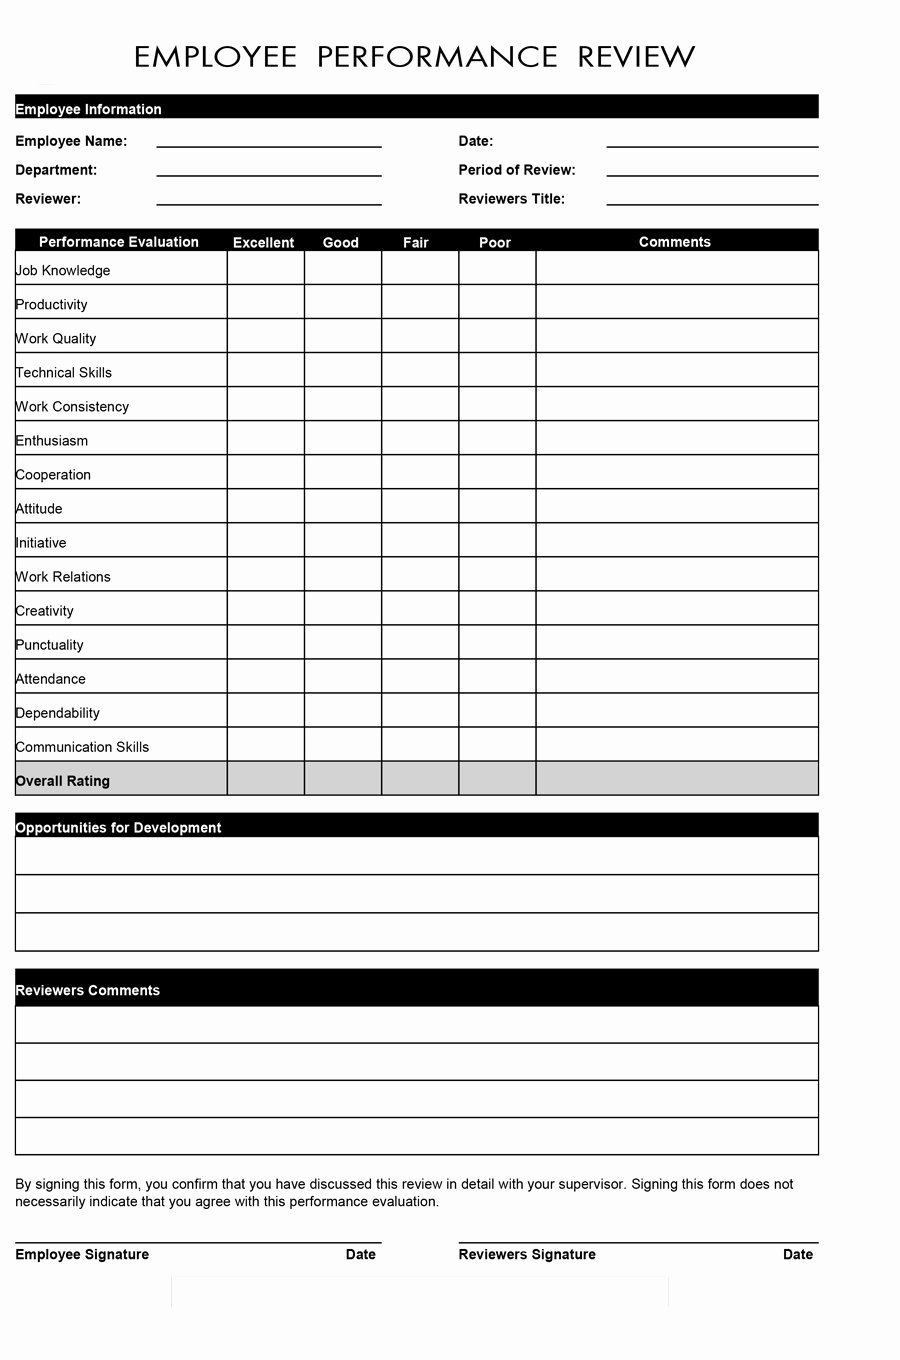 Employee Performance Review Template Lovely 46 Employee Evaluation forms &amp; Performance Review Examples